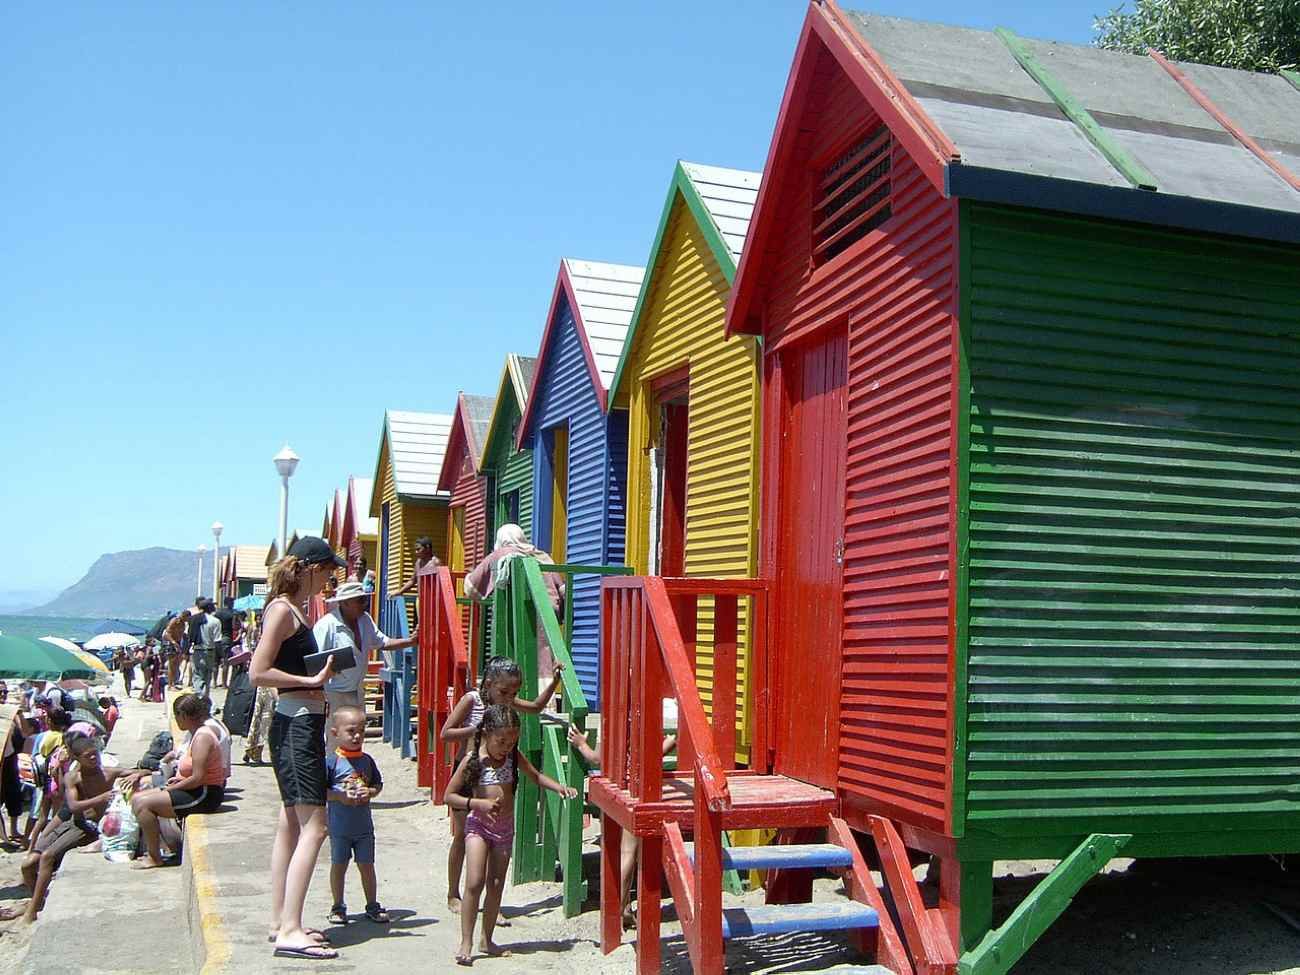 South Africa: Cape Town has the Highest Quality of Life in Africa 